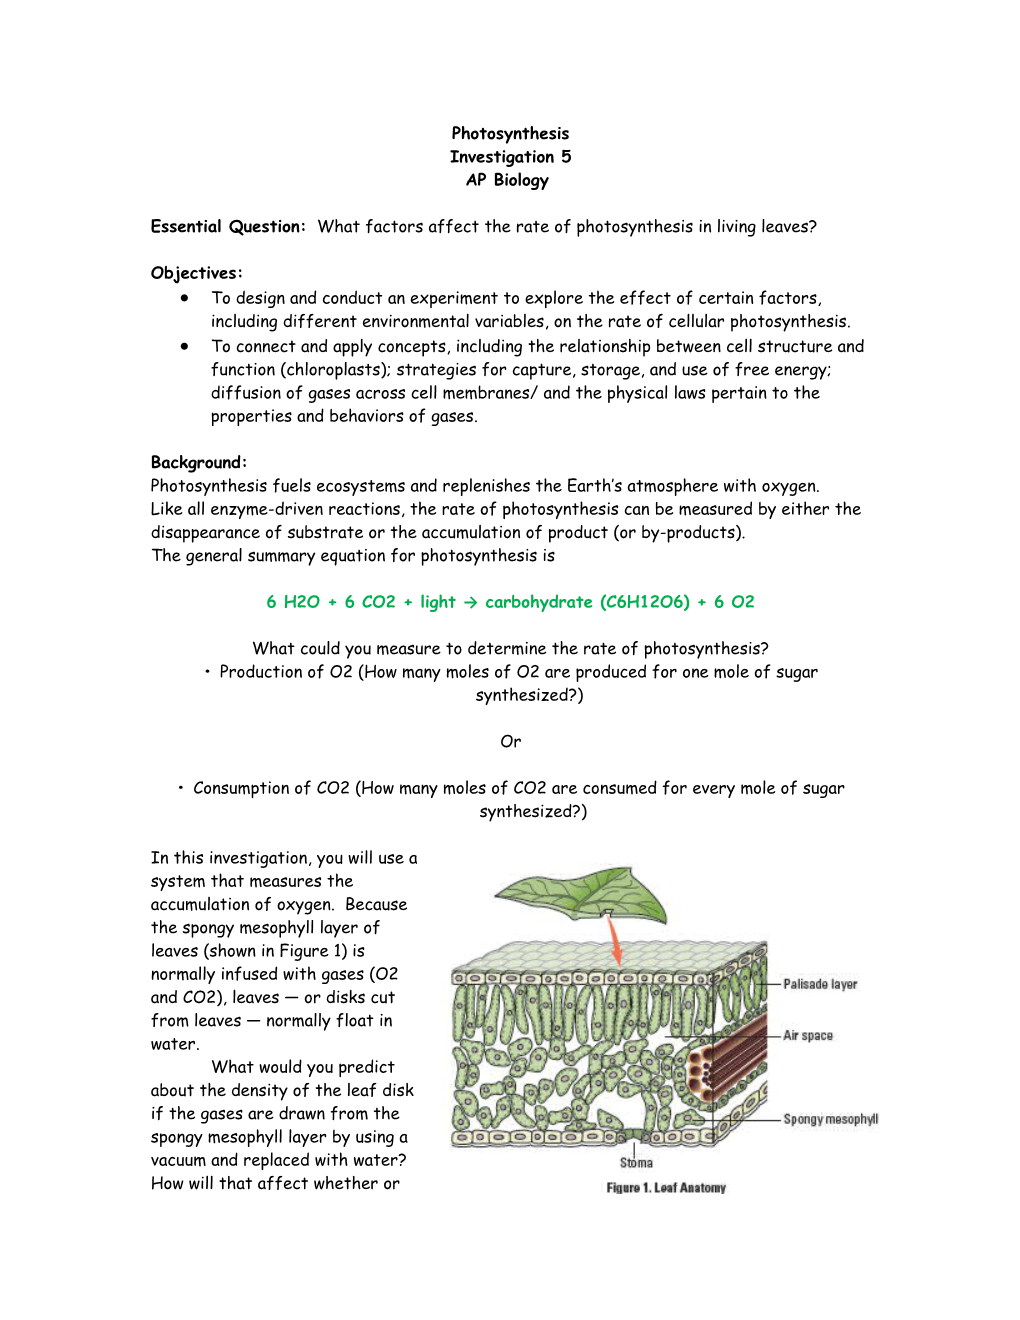 Essential Question: What Factors Affect the Rate of Photosynthesis in Living Leaves?